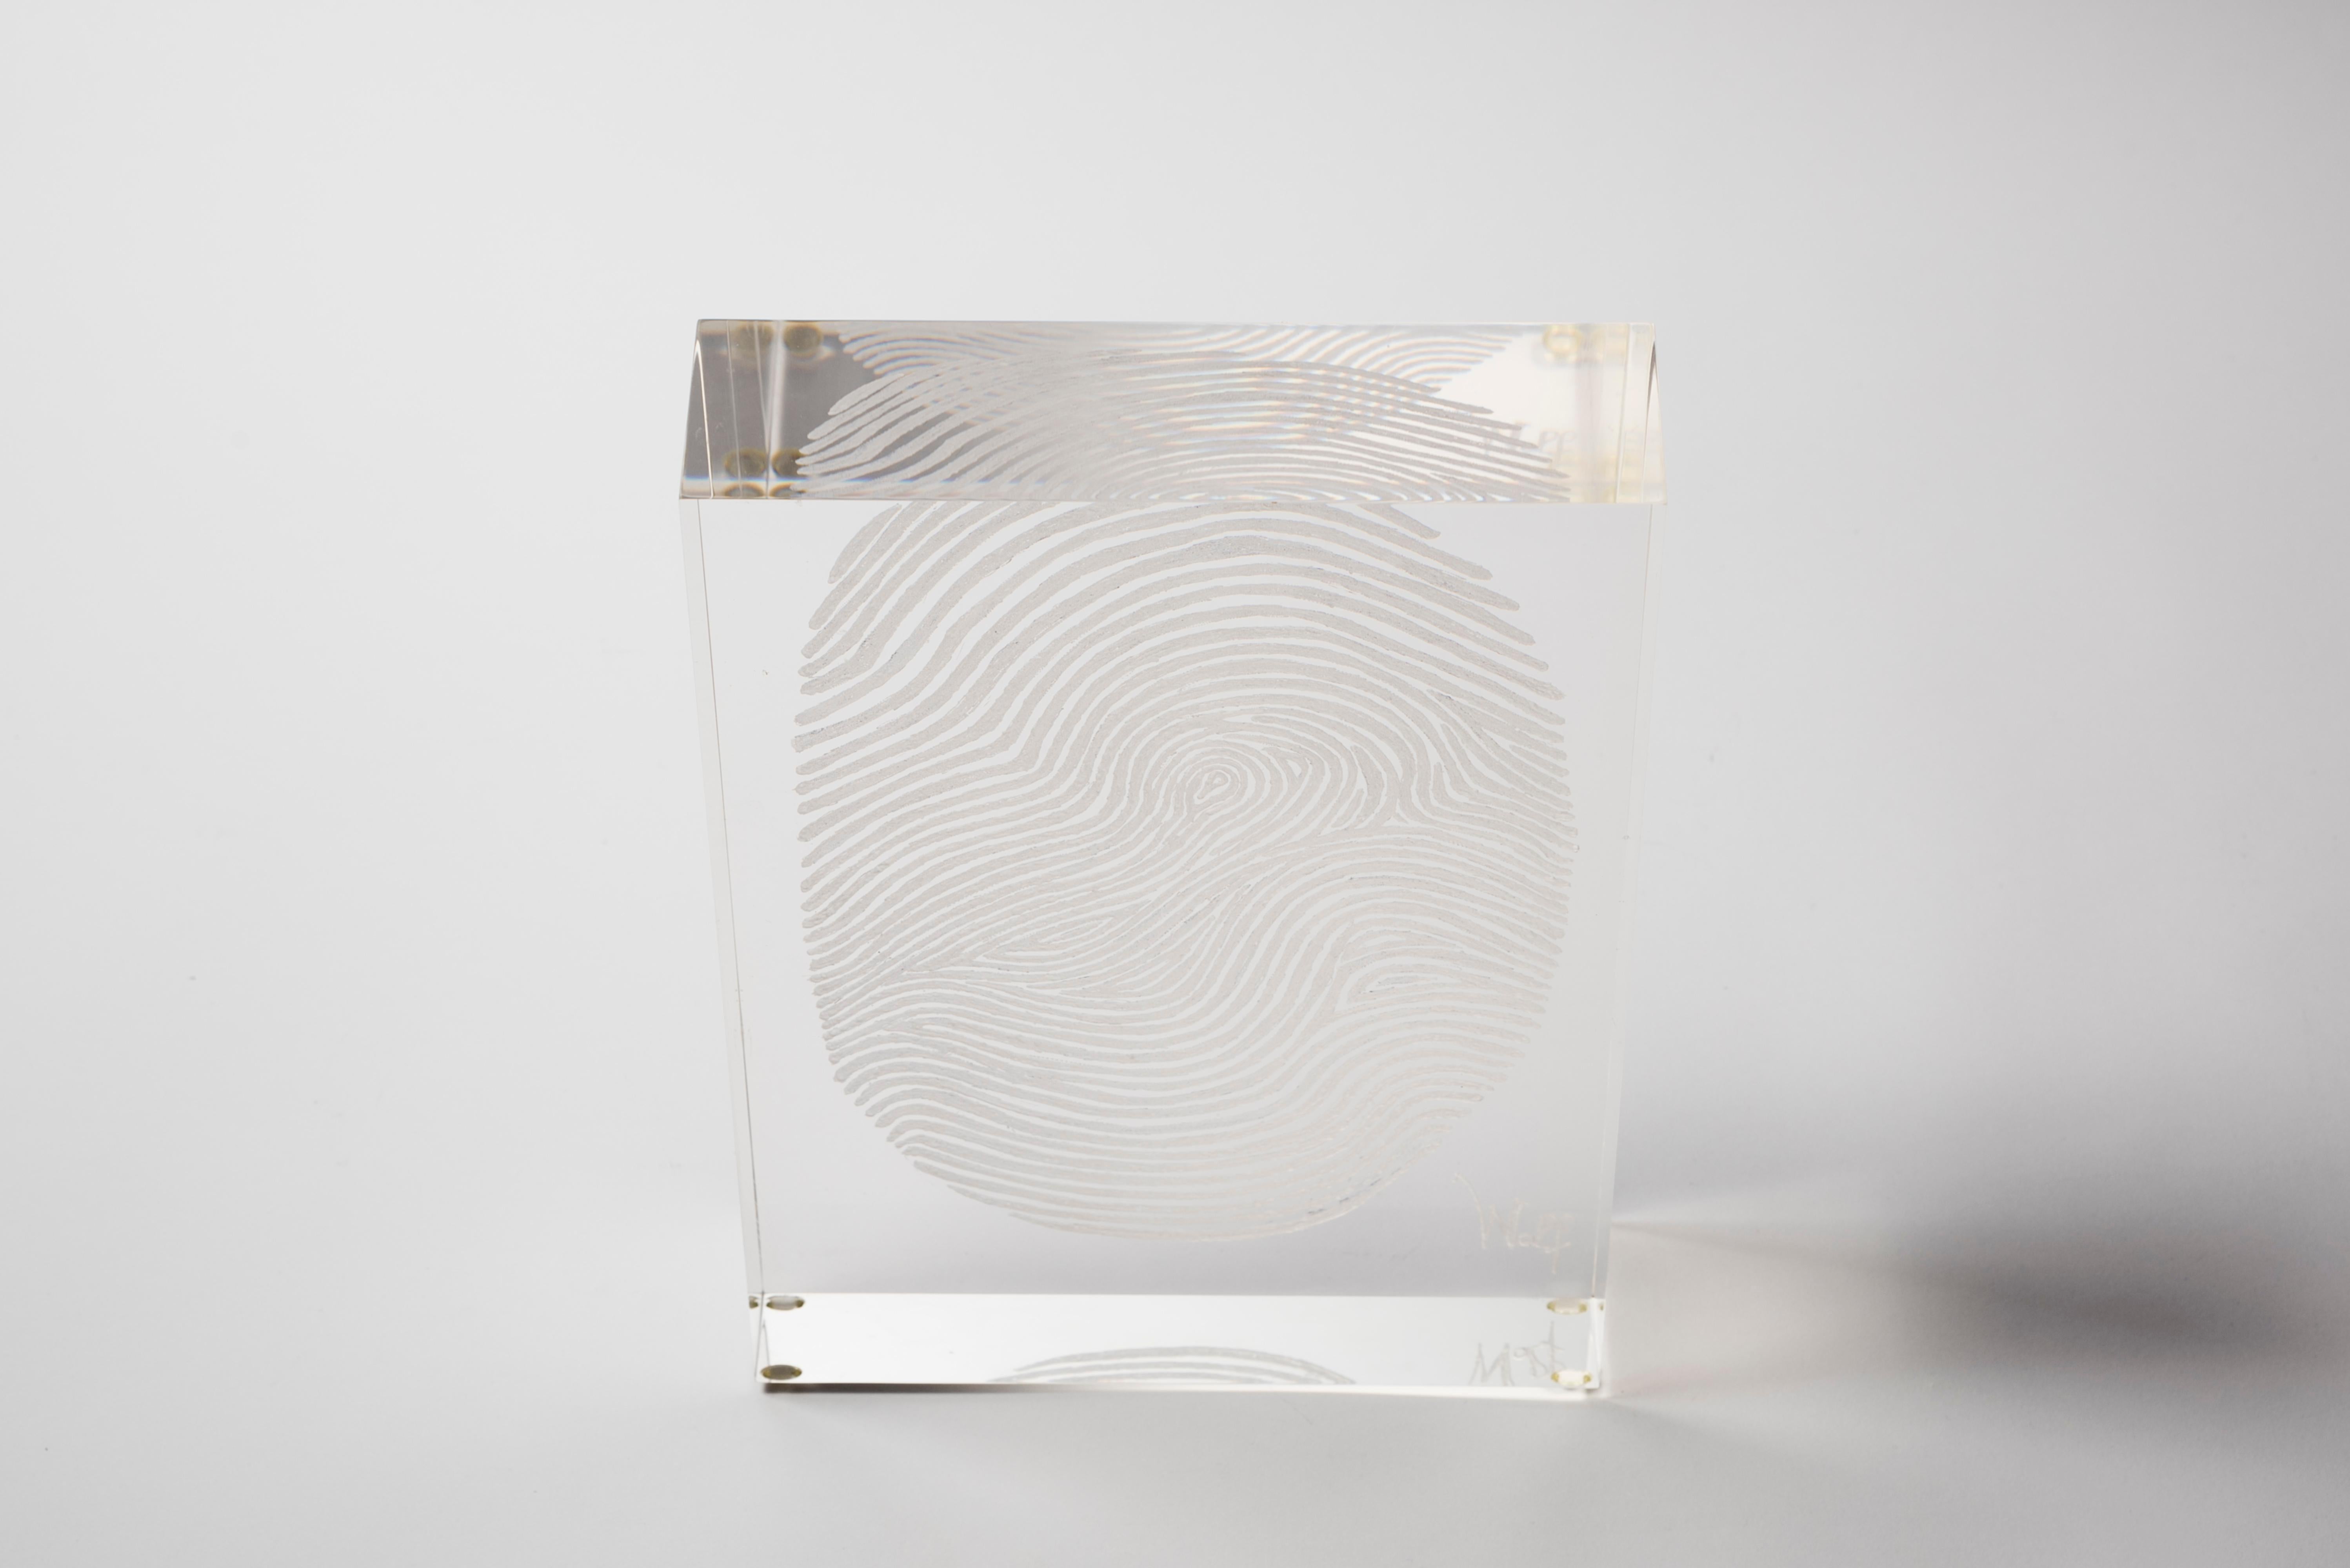 Finger print in Lucite signed Wolf
1/1 signed.